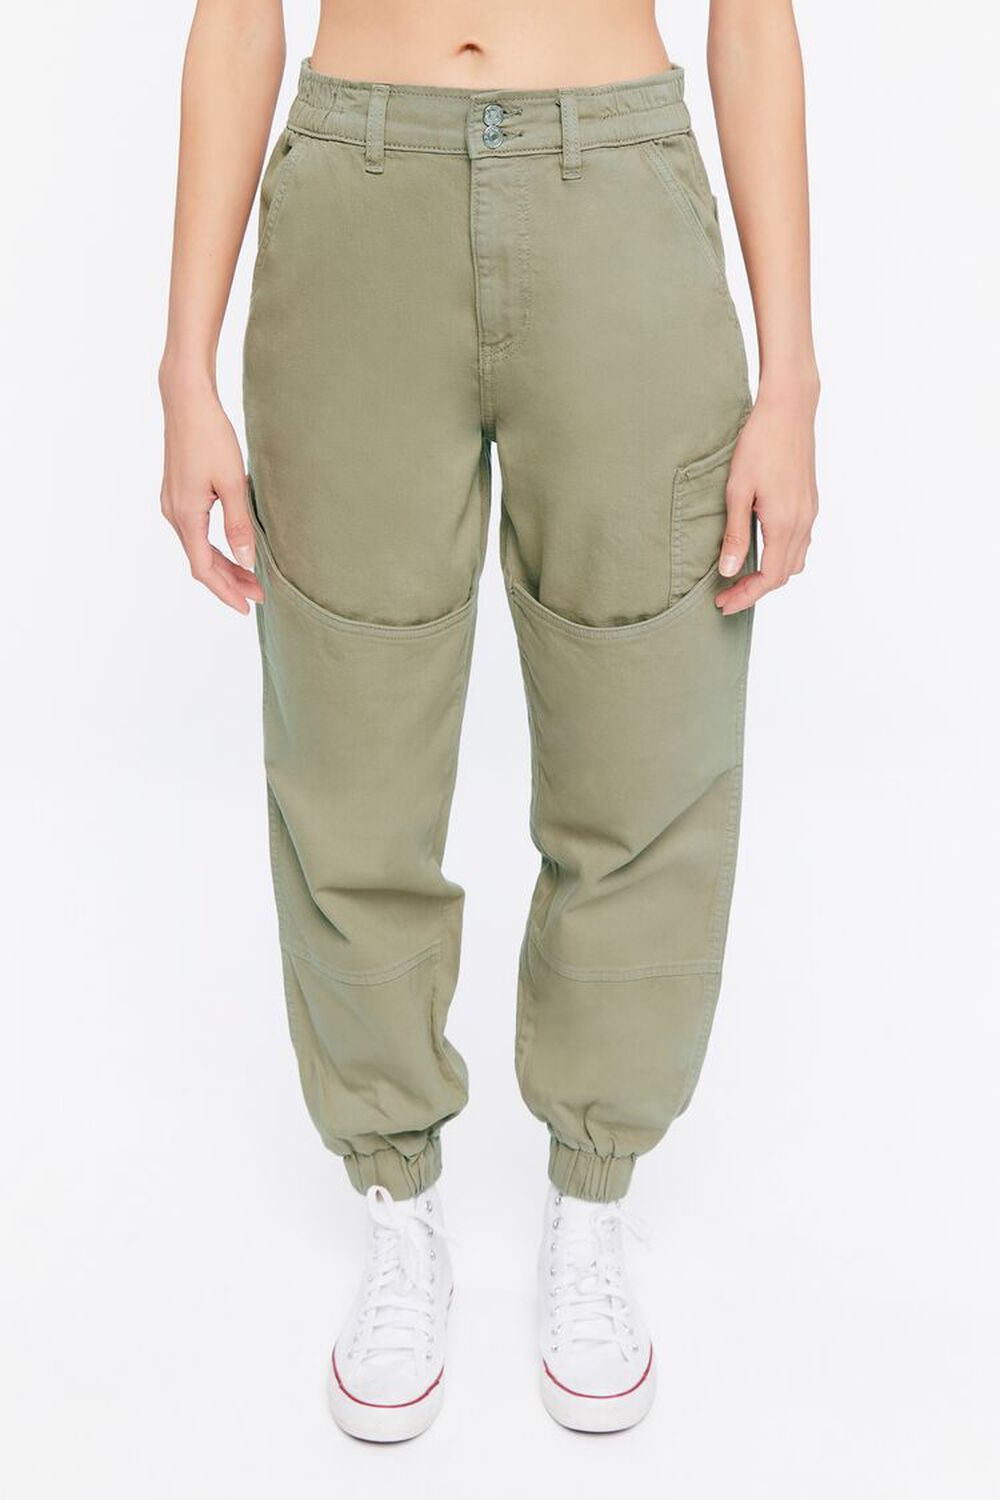 OLIVE Pocket High-Rise Twill Joggers, image 2